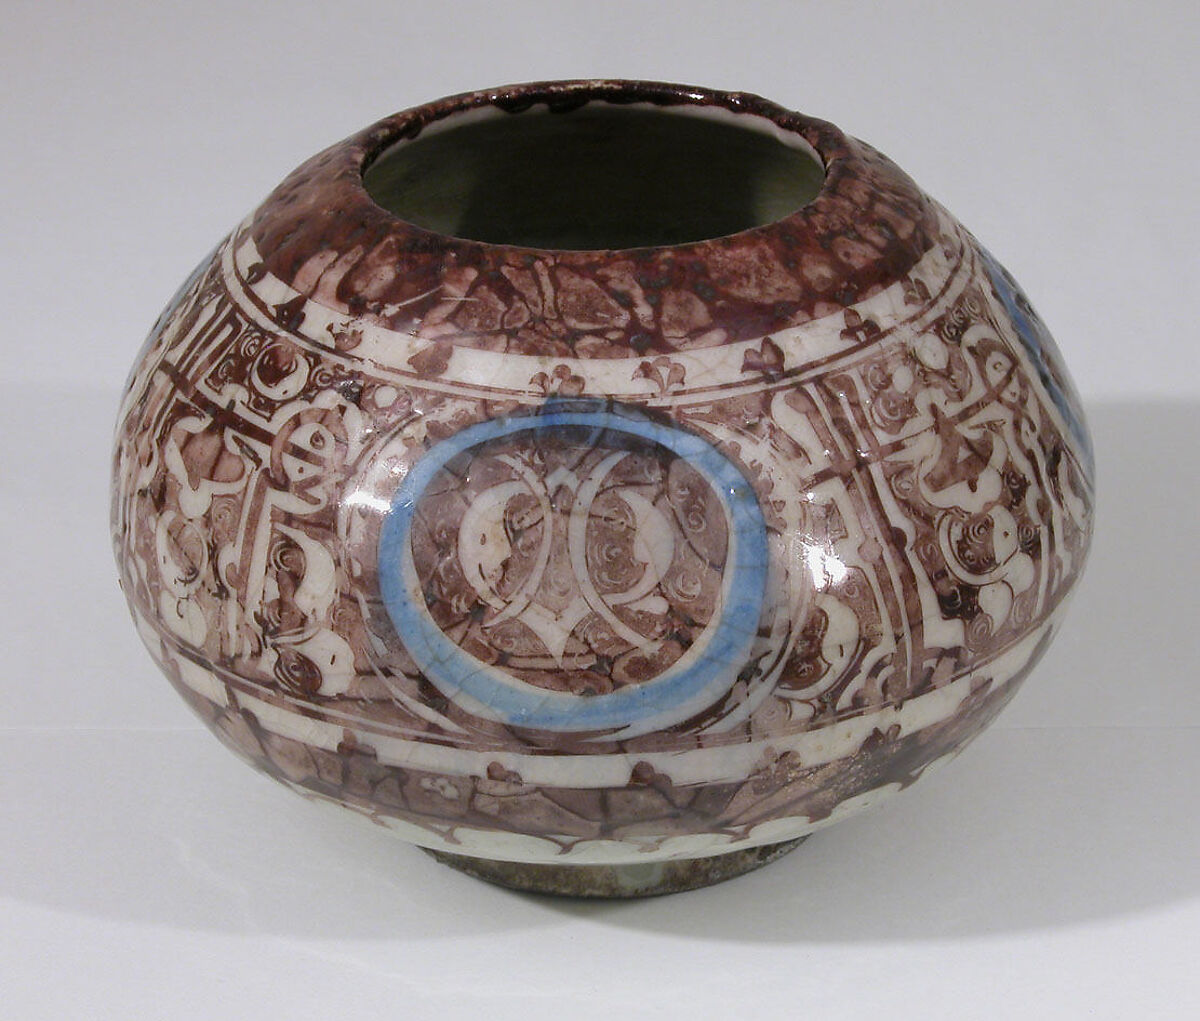 Bowl, Stonepaste; painted in luster and blue on opaque white glaze under transparent colorless glaze